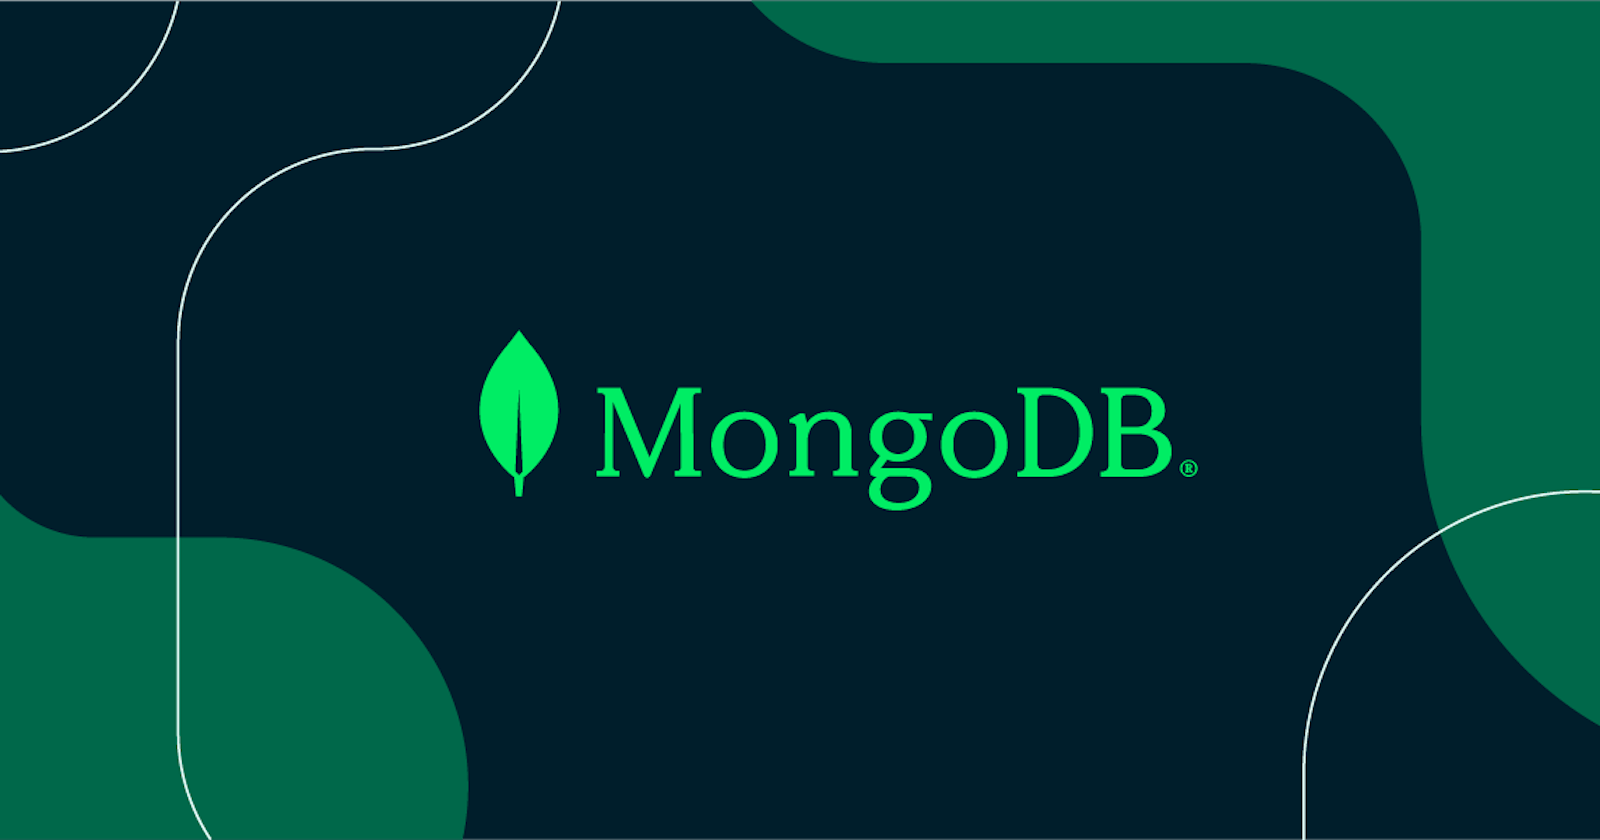 The first day of learning MongoDB